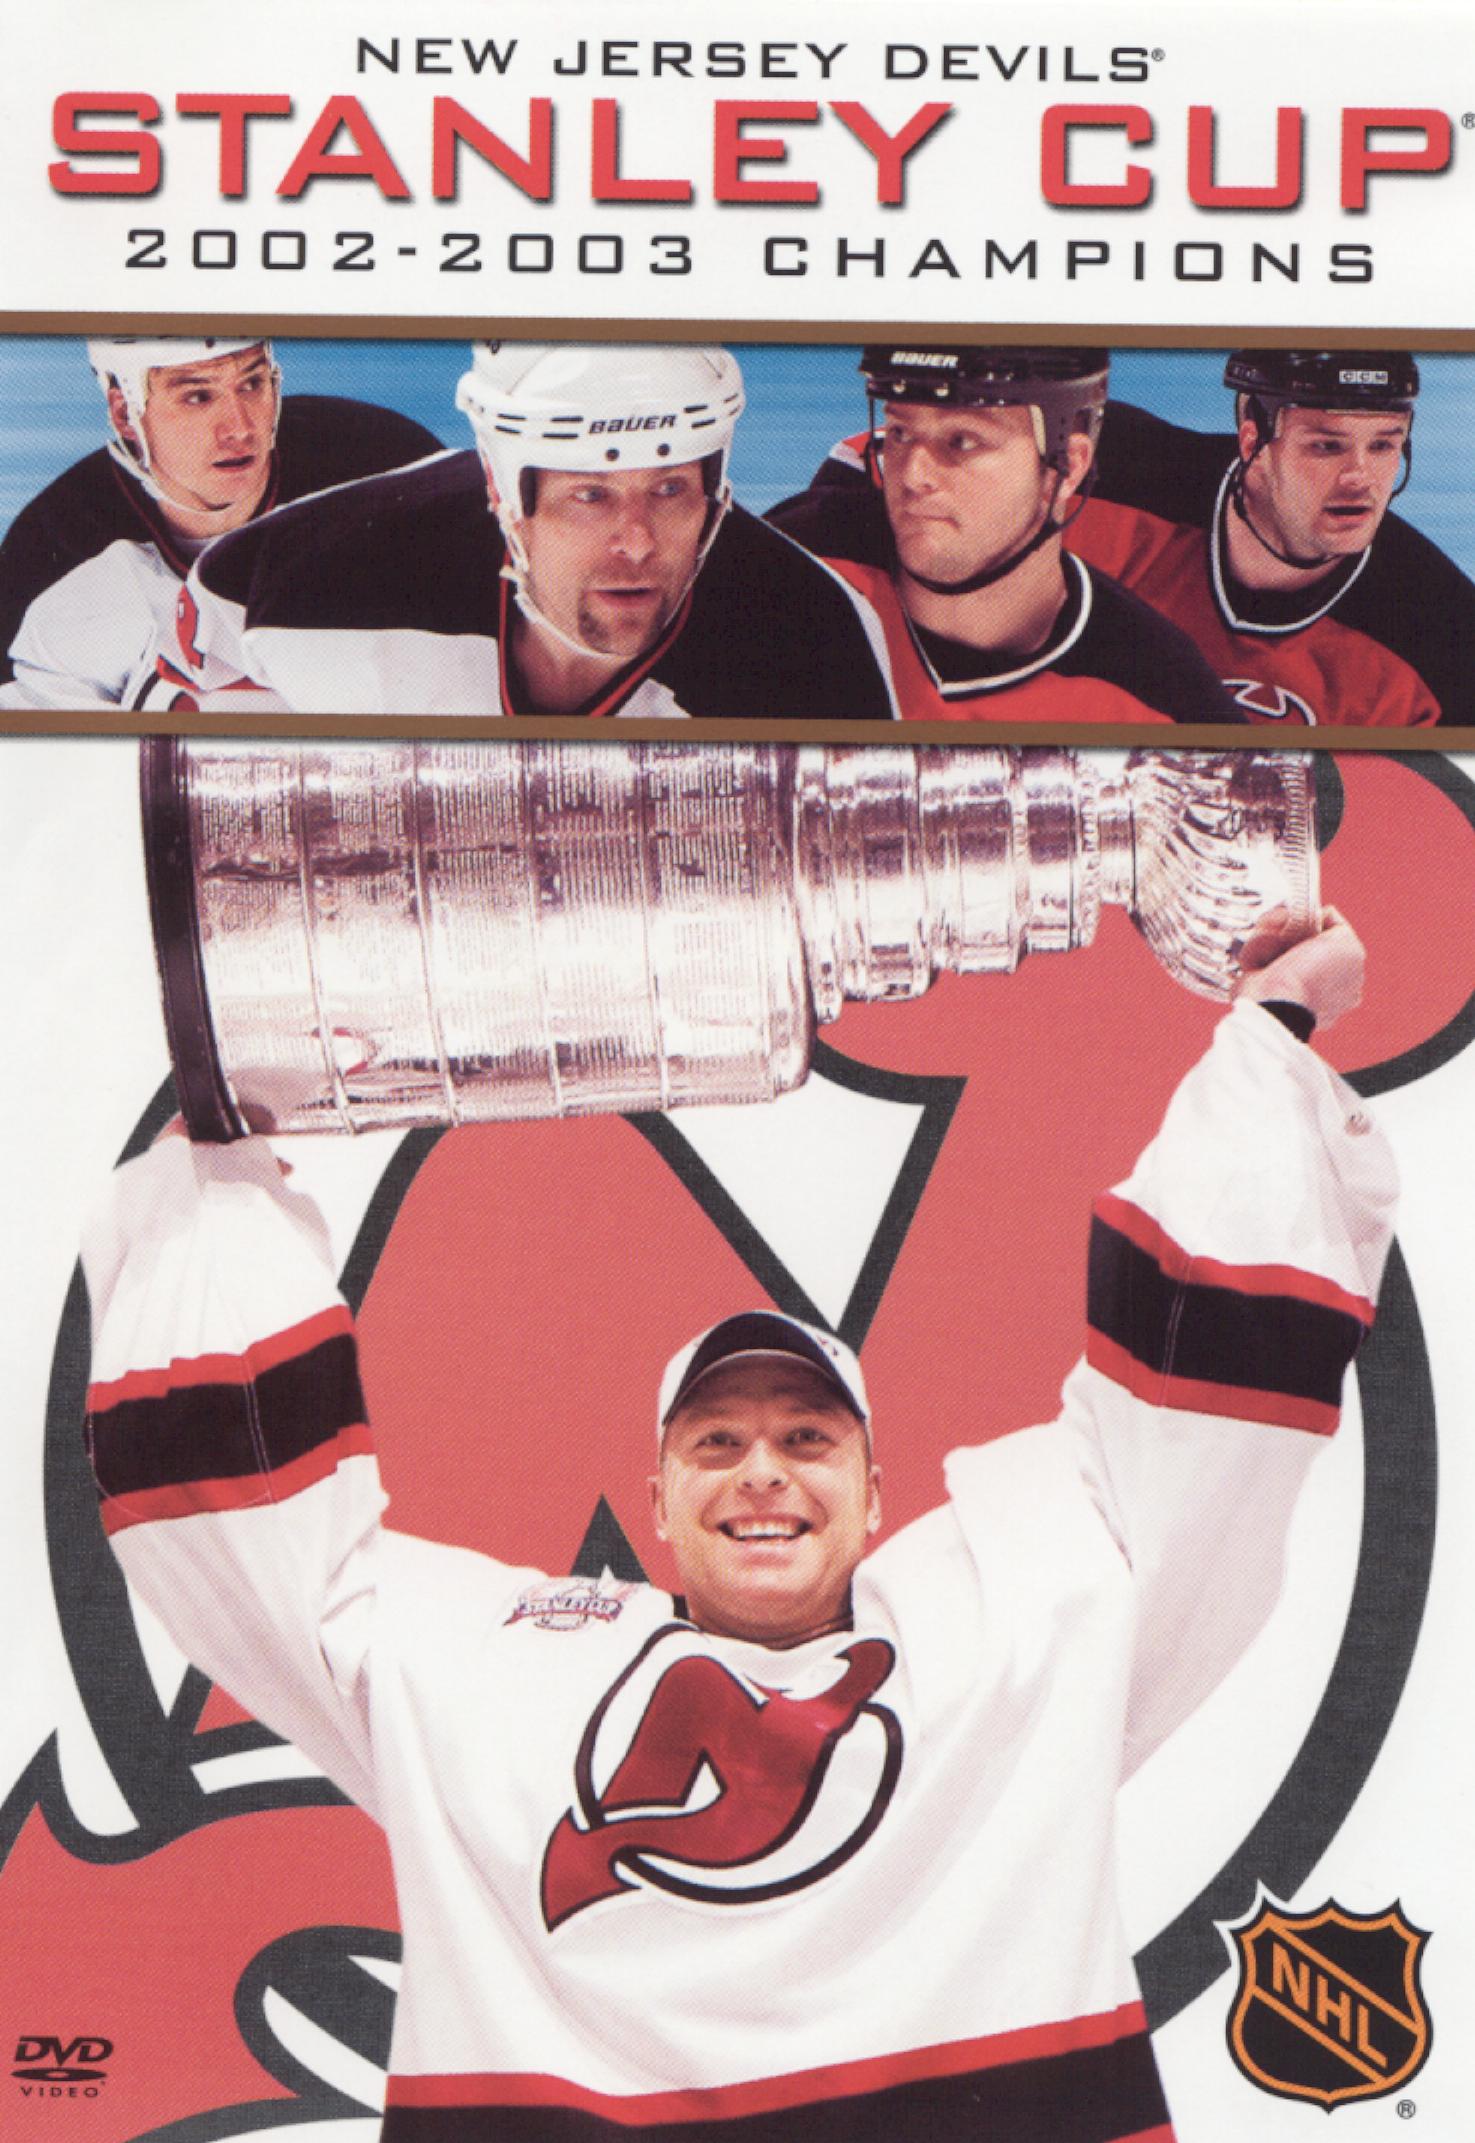 New Jersey Devils 2003 Stanley Cup Champions (DVD, 2003) for sale online